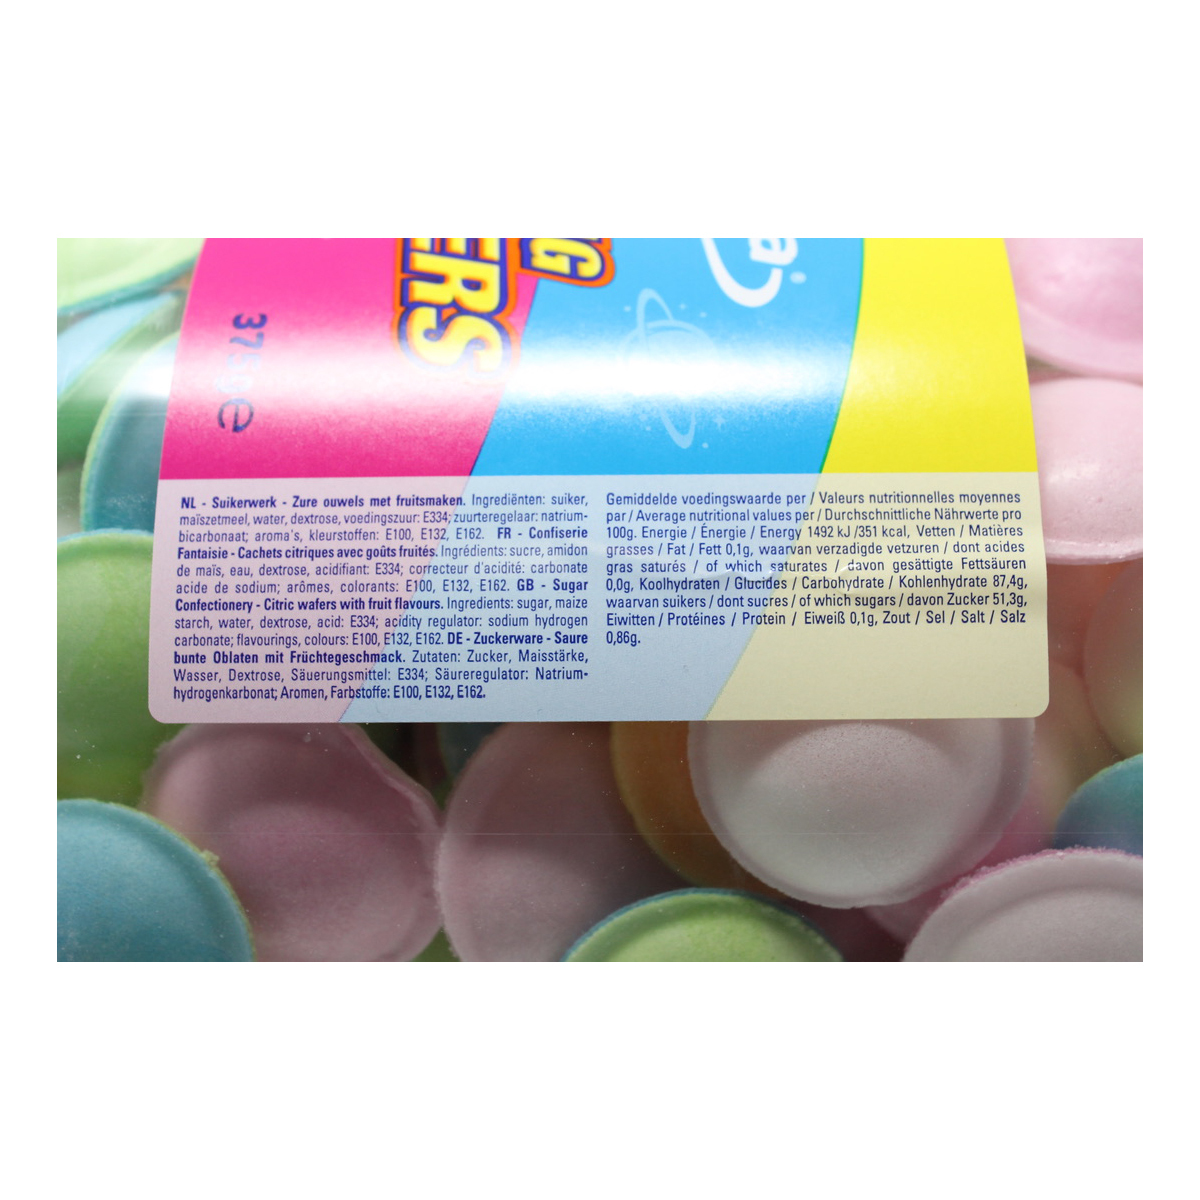 Astra Flying Saucers, 375g